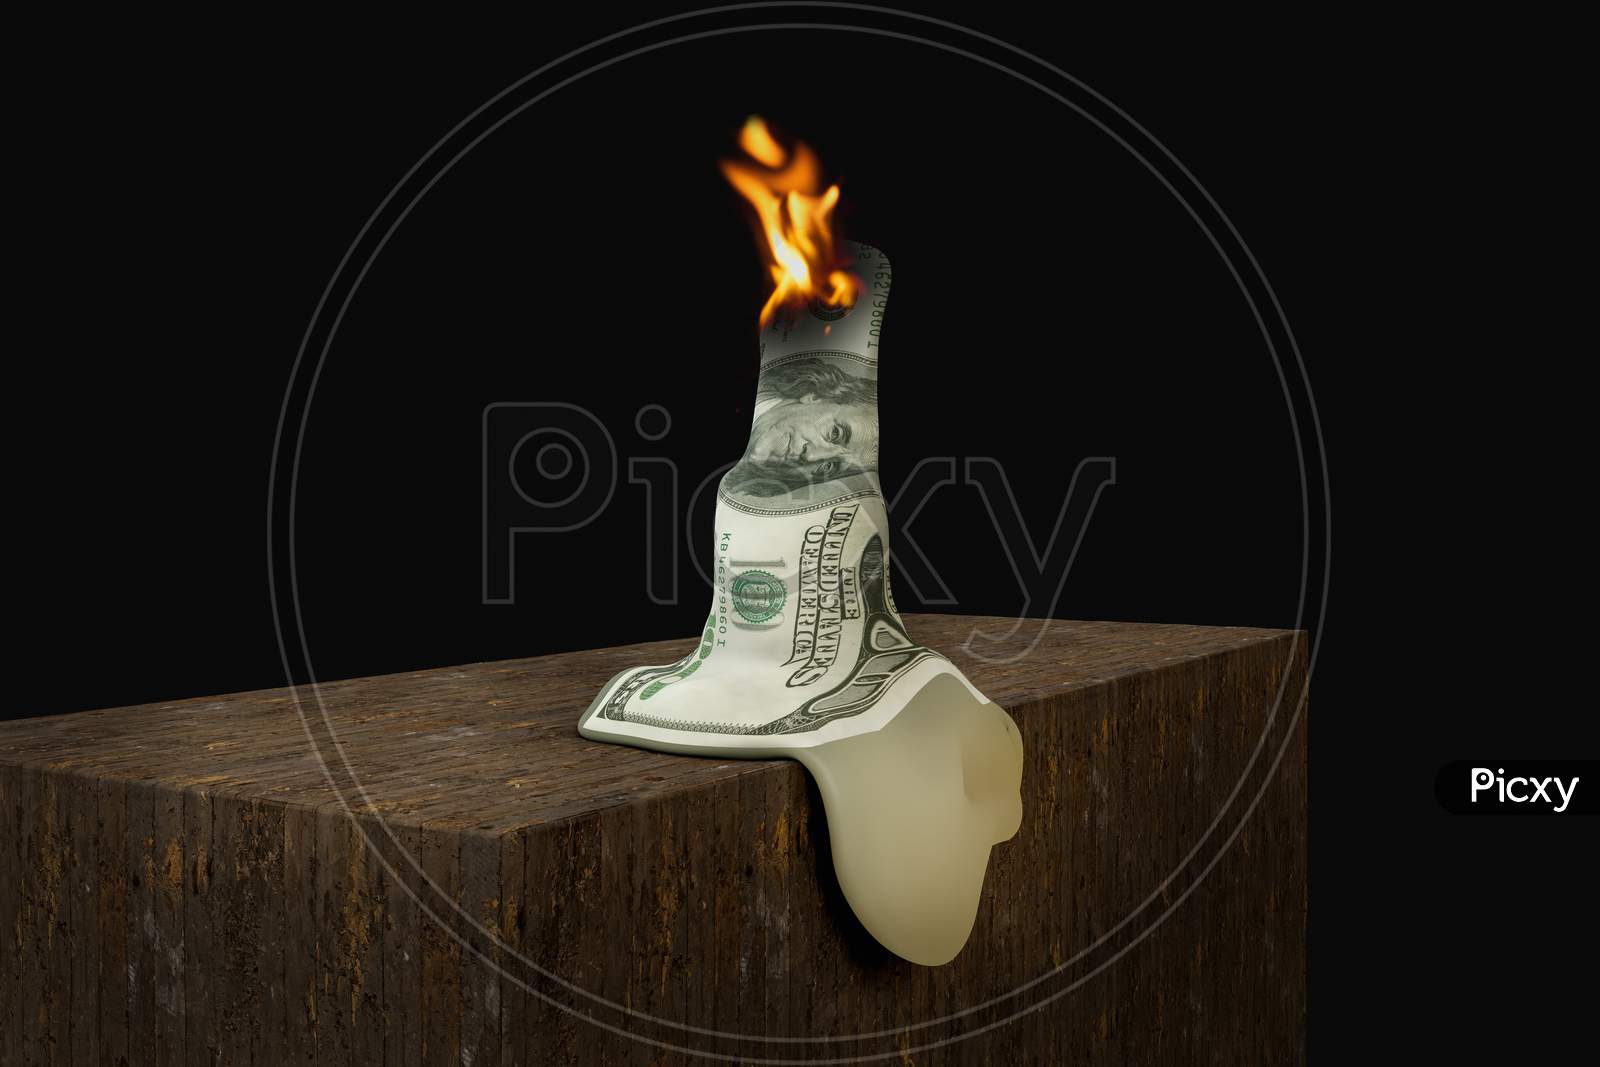 One Hundred Dollar Bill In A Shape Of Candle Burning In Black Background. Your Next Stimulus Payment May Be The Final One Or The Heroes Act Or Don'T Bank On Tons Of Stimulus Cash Concept. 3D Render